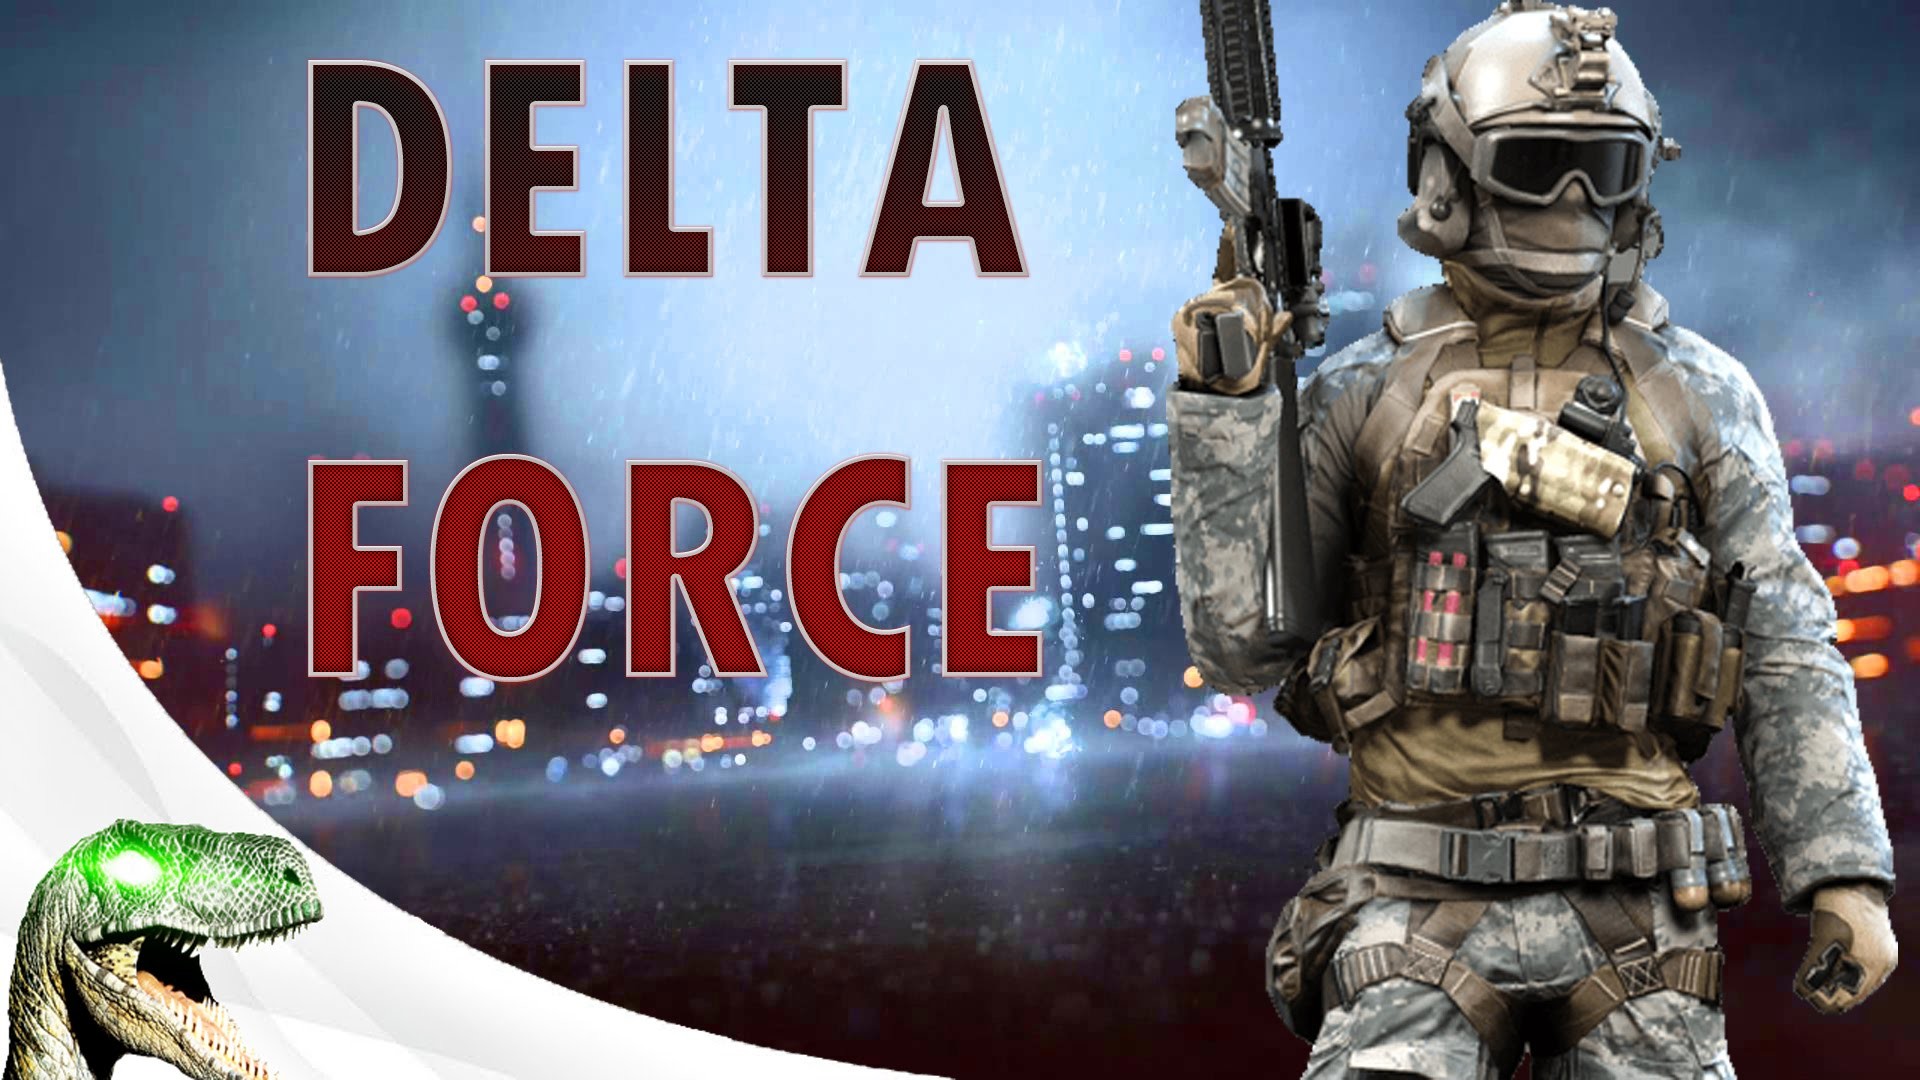 delta force wallpaper,action adventure game,shooter game,pc game,strategy video game,soldier